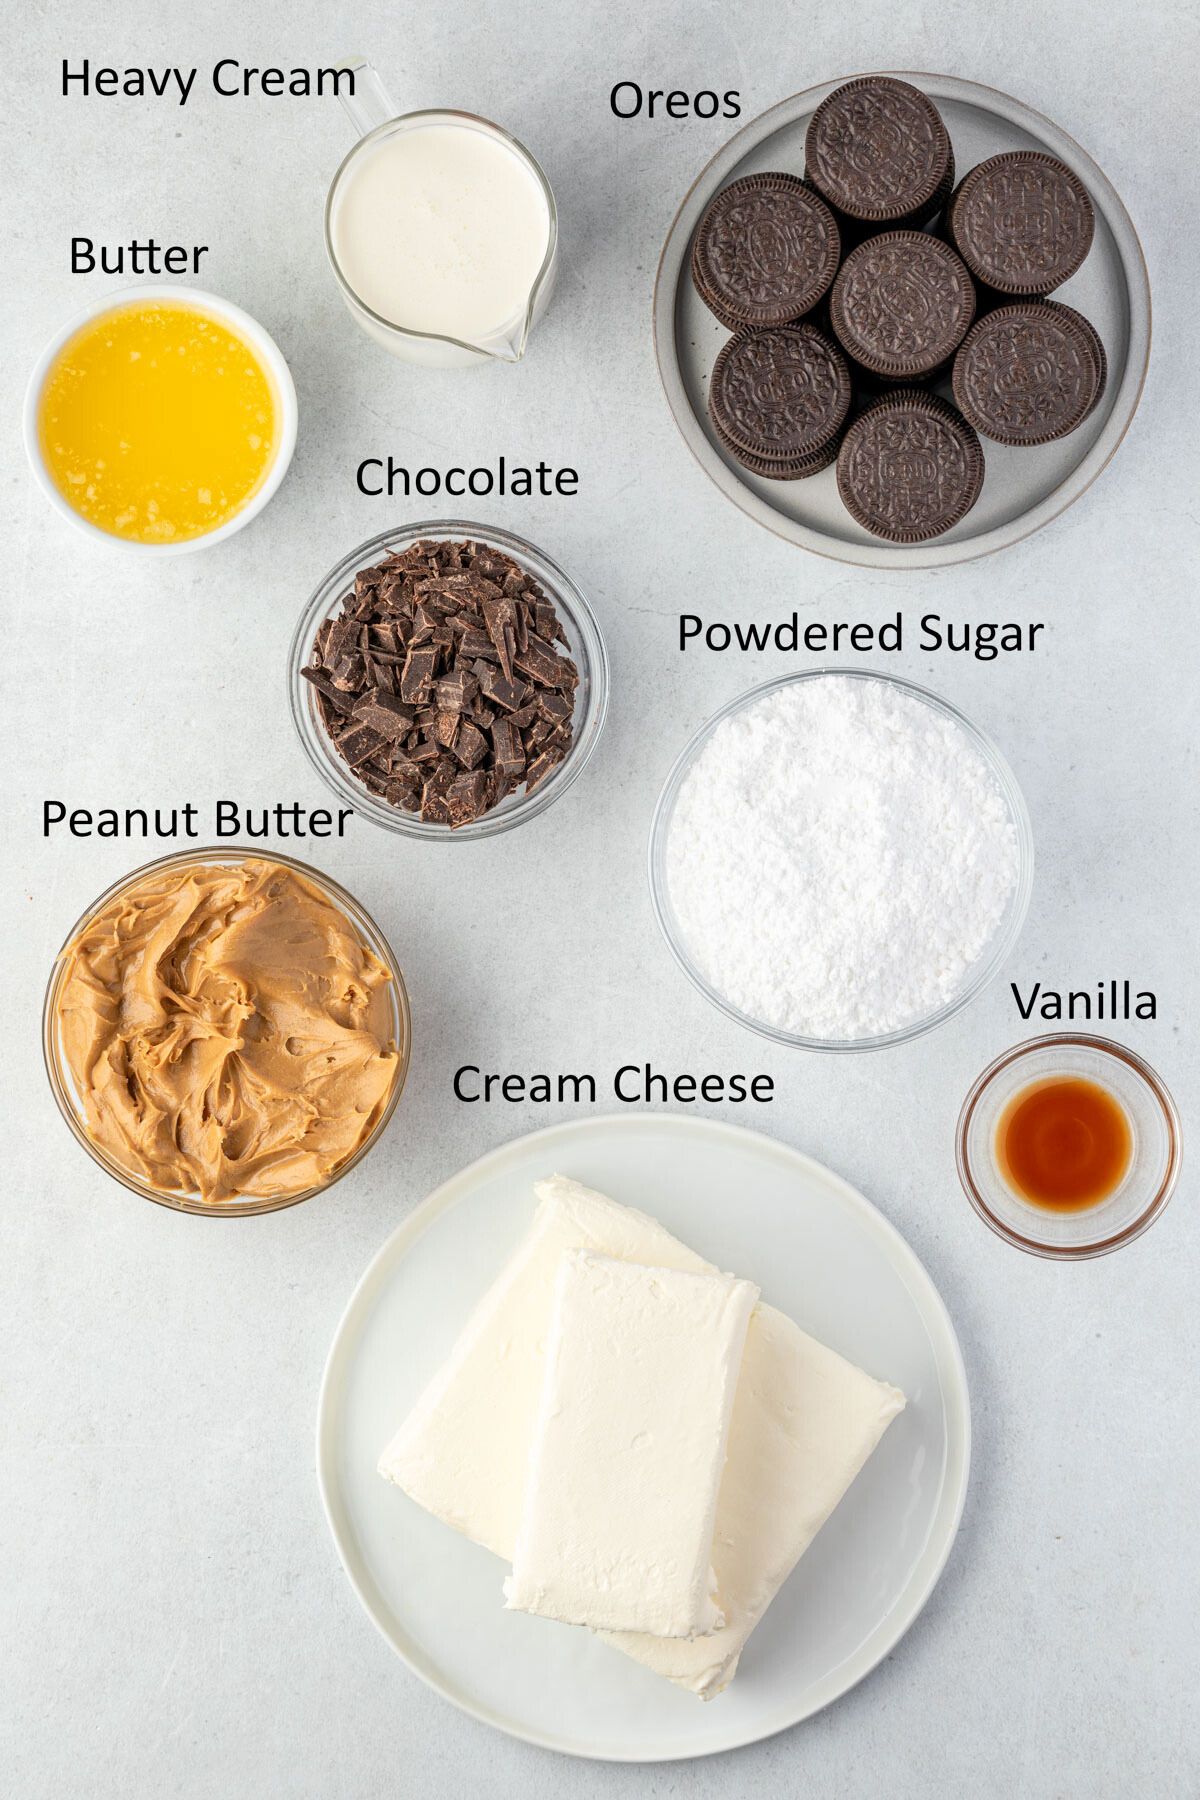 Overhead of the recipe ingredients each on individal plates or in bowls.